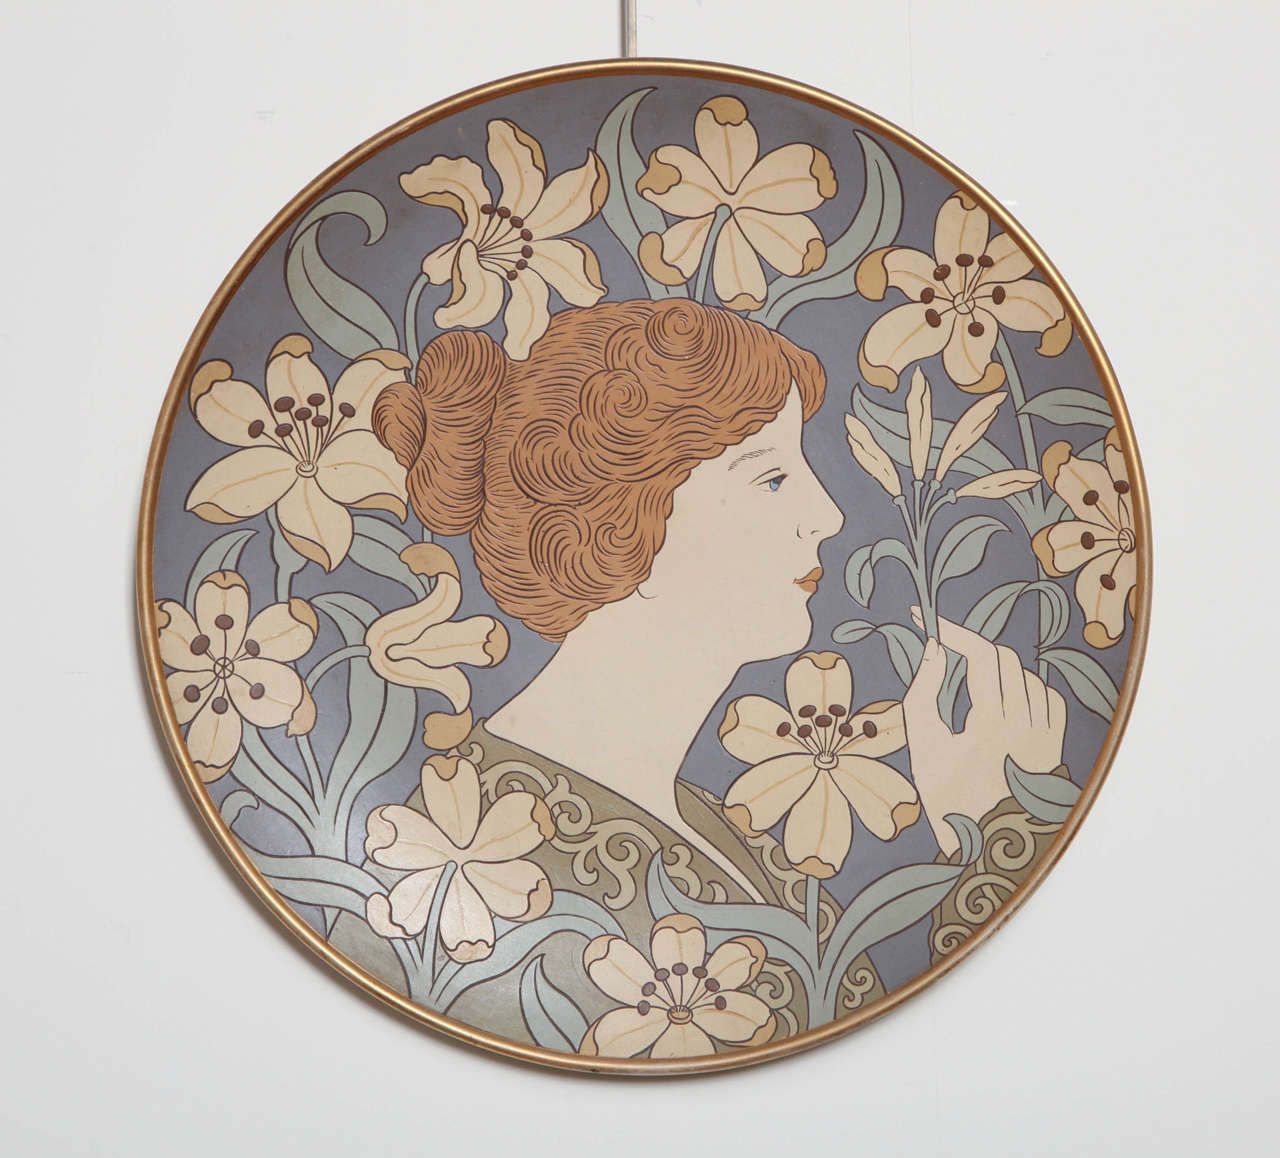 Beautiful Art Nouveau plaque made in Mettlach Saarland, Germany by Villeroy and Boch
The Sgraffito Art Nouveau plaque of a woman's bust with flower boarder was made in 1899 and stamped on the back with the castle mark and # 2548., unusual great